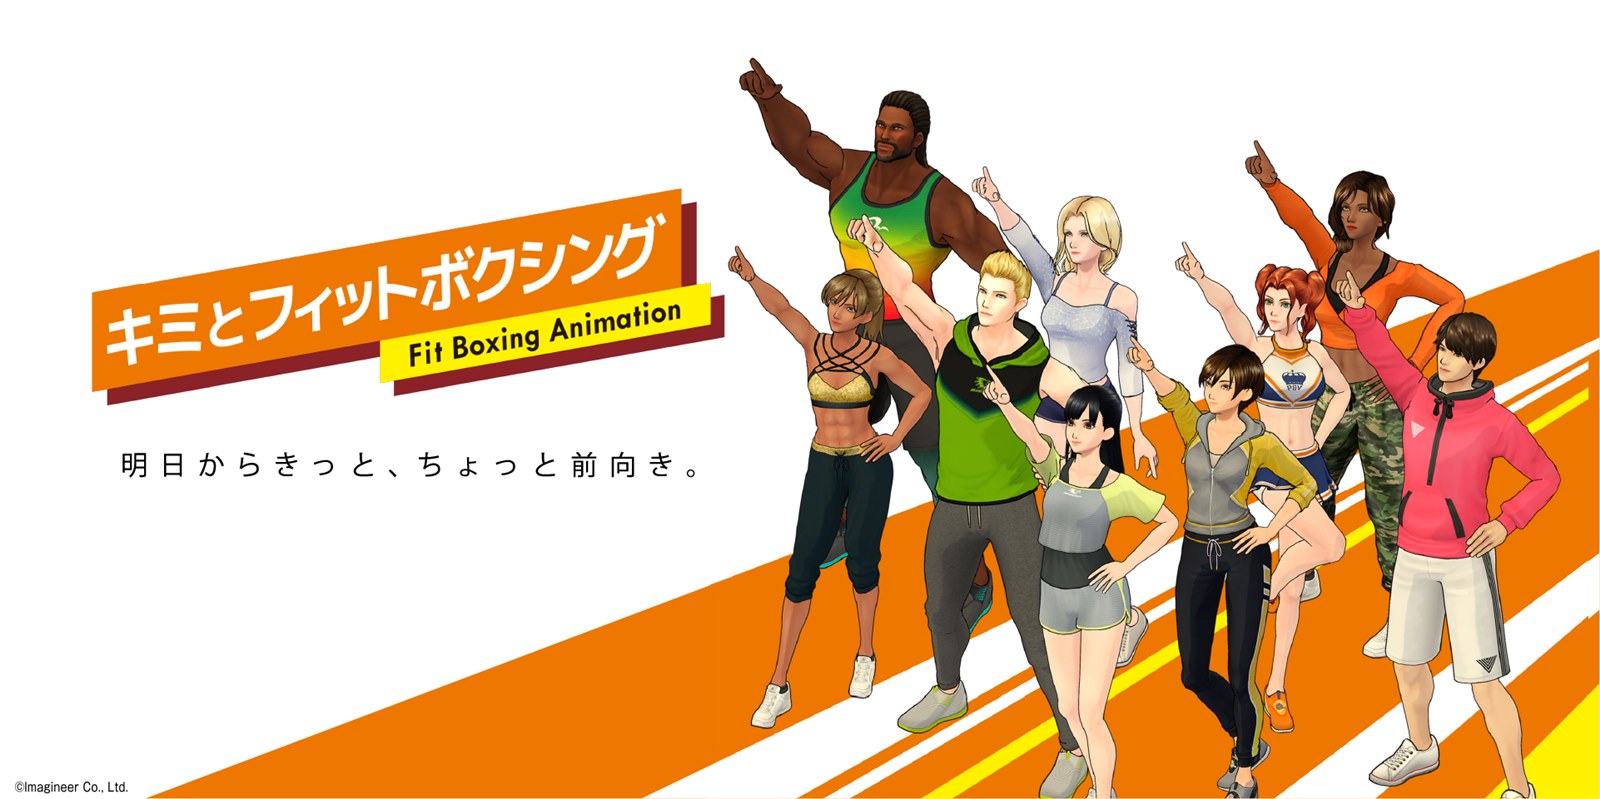 Fitness Boxing for the Nintendo Switch gets an unexpected anime adaptation, airing in Japan this October